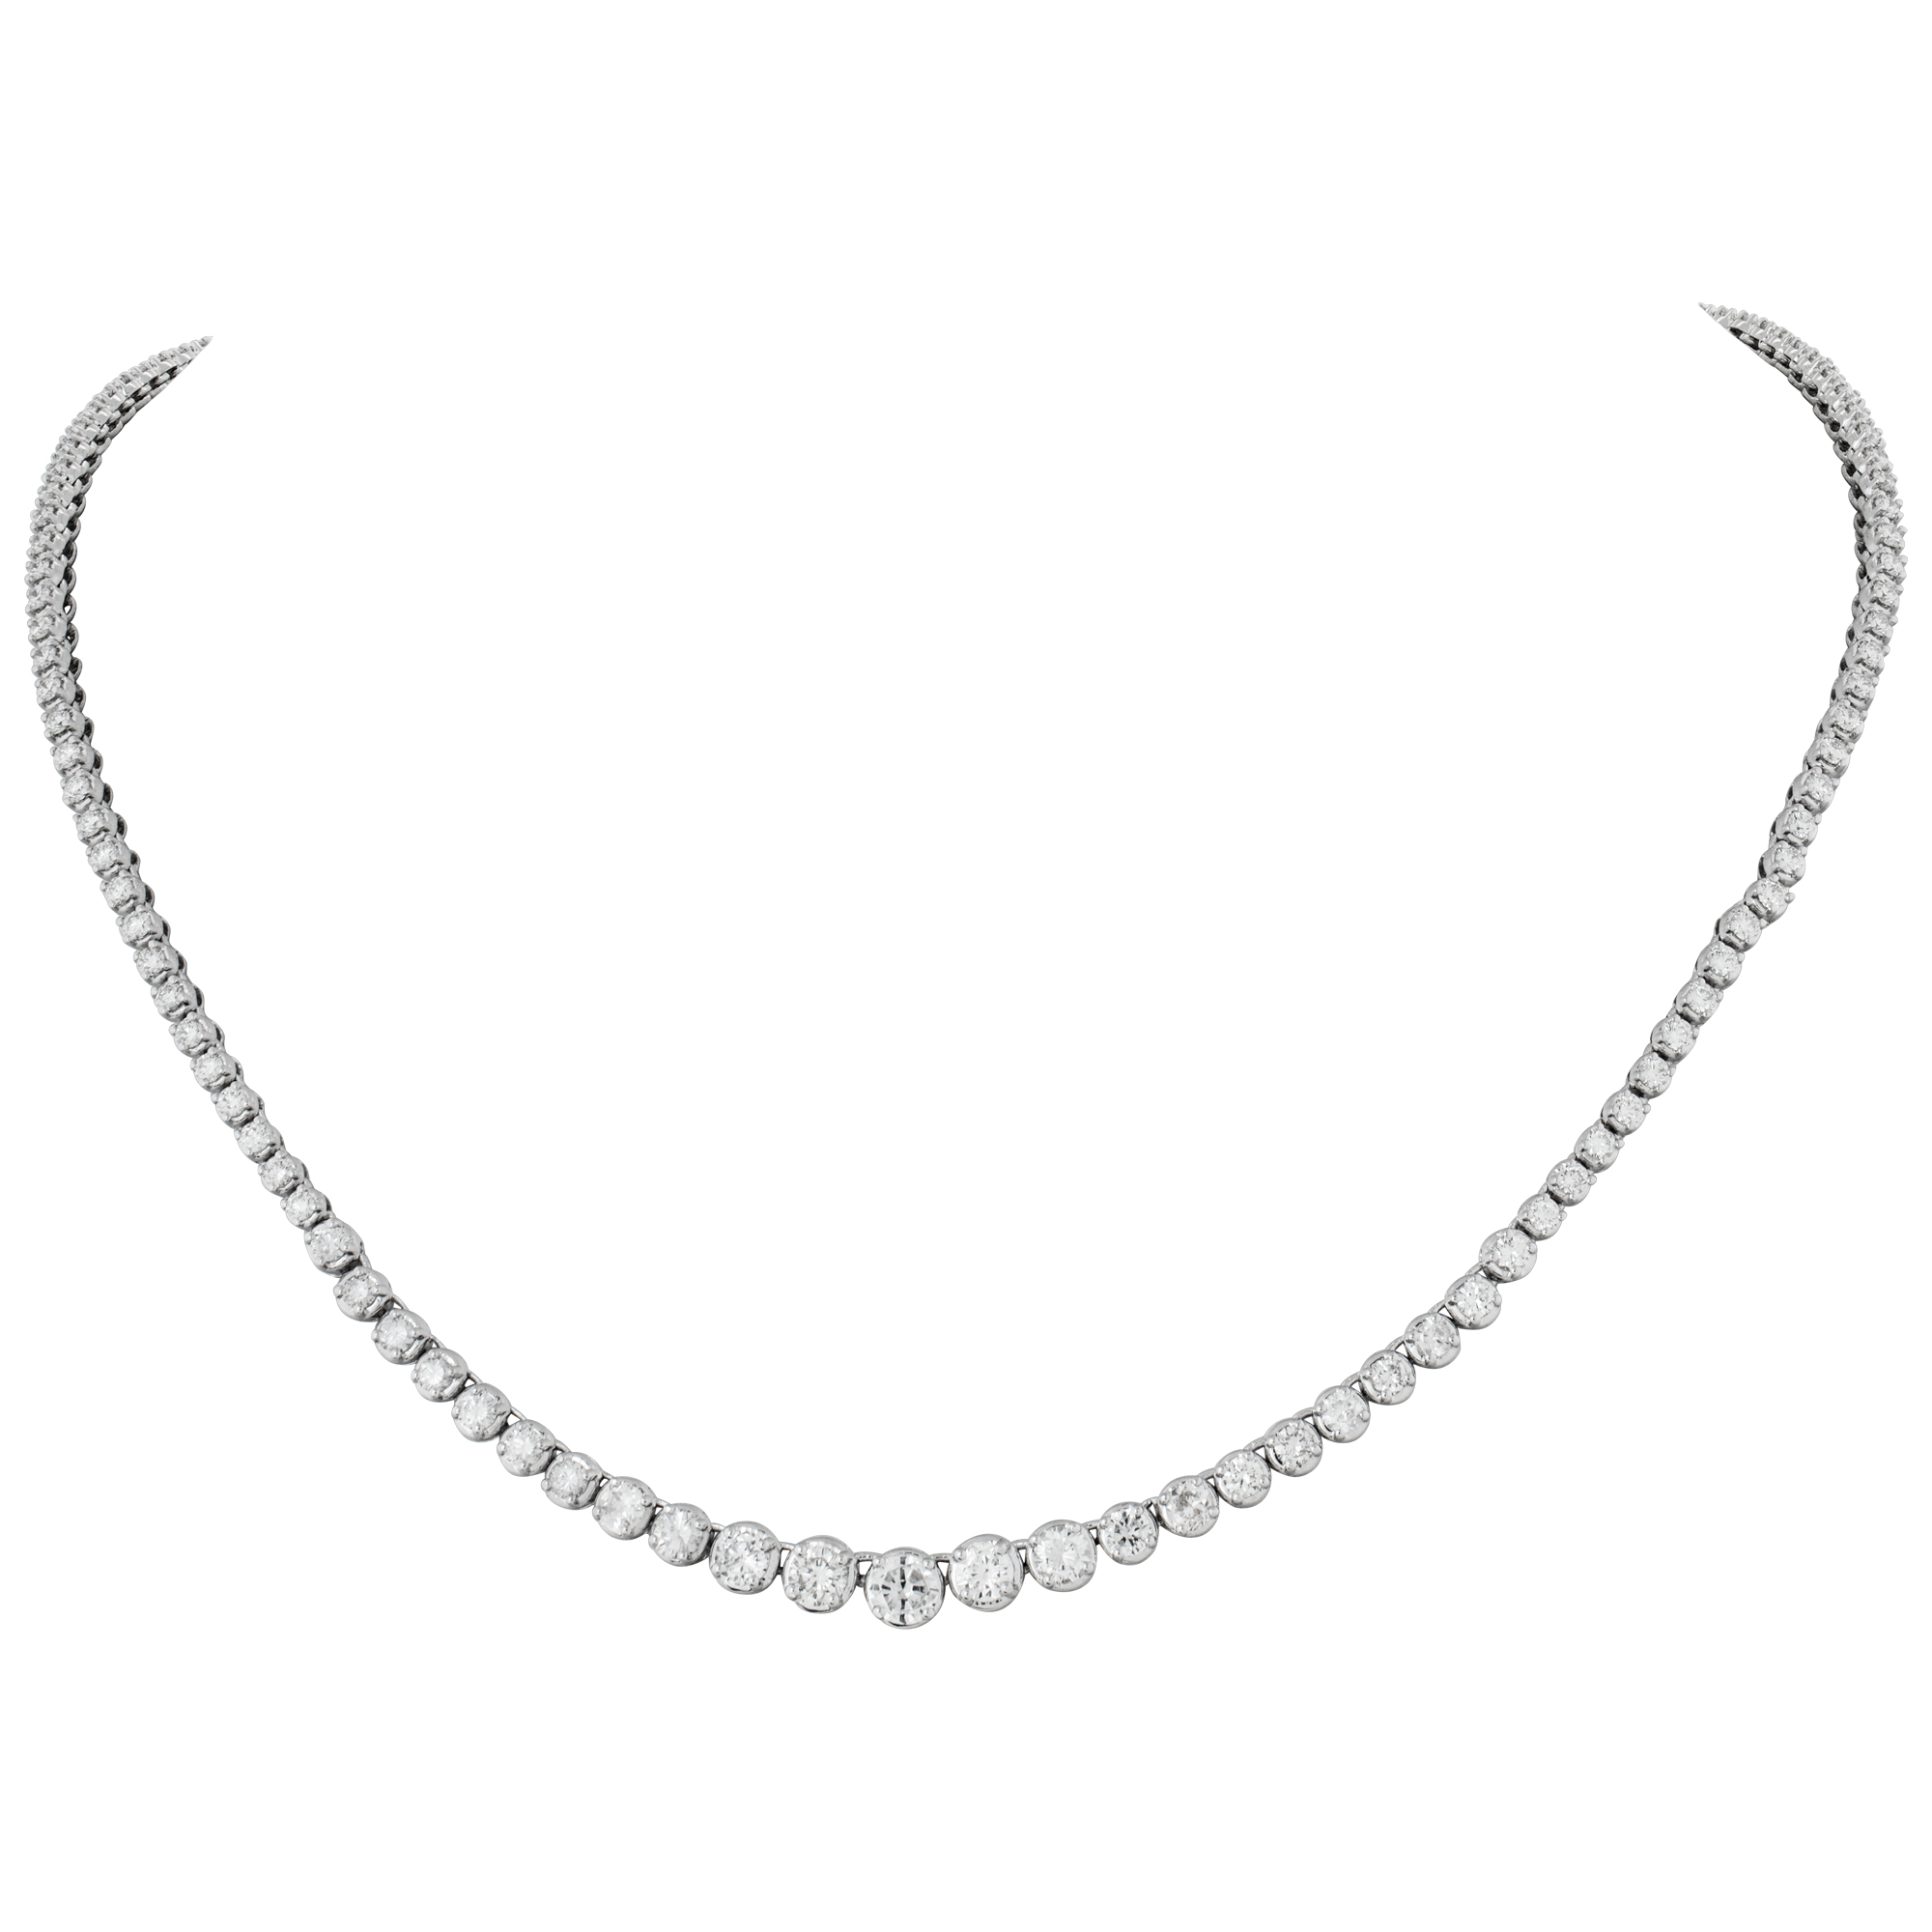 Diamond tennis necklace 6 carats in 18k white gold